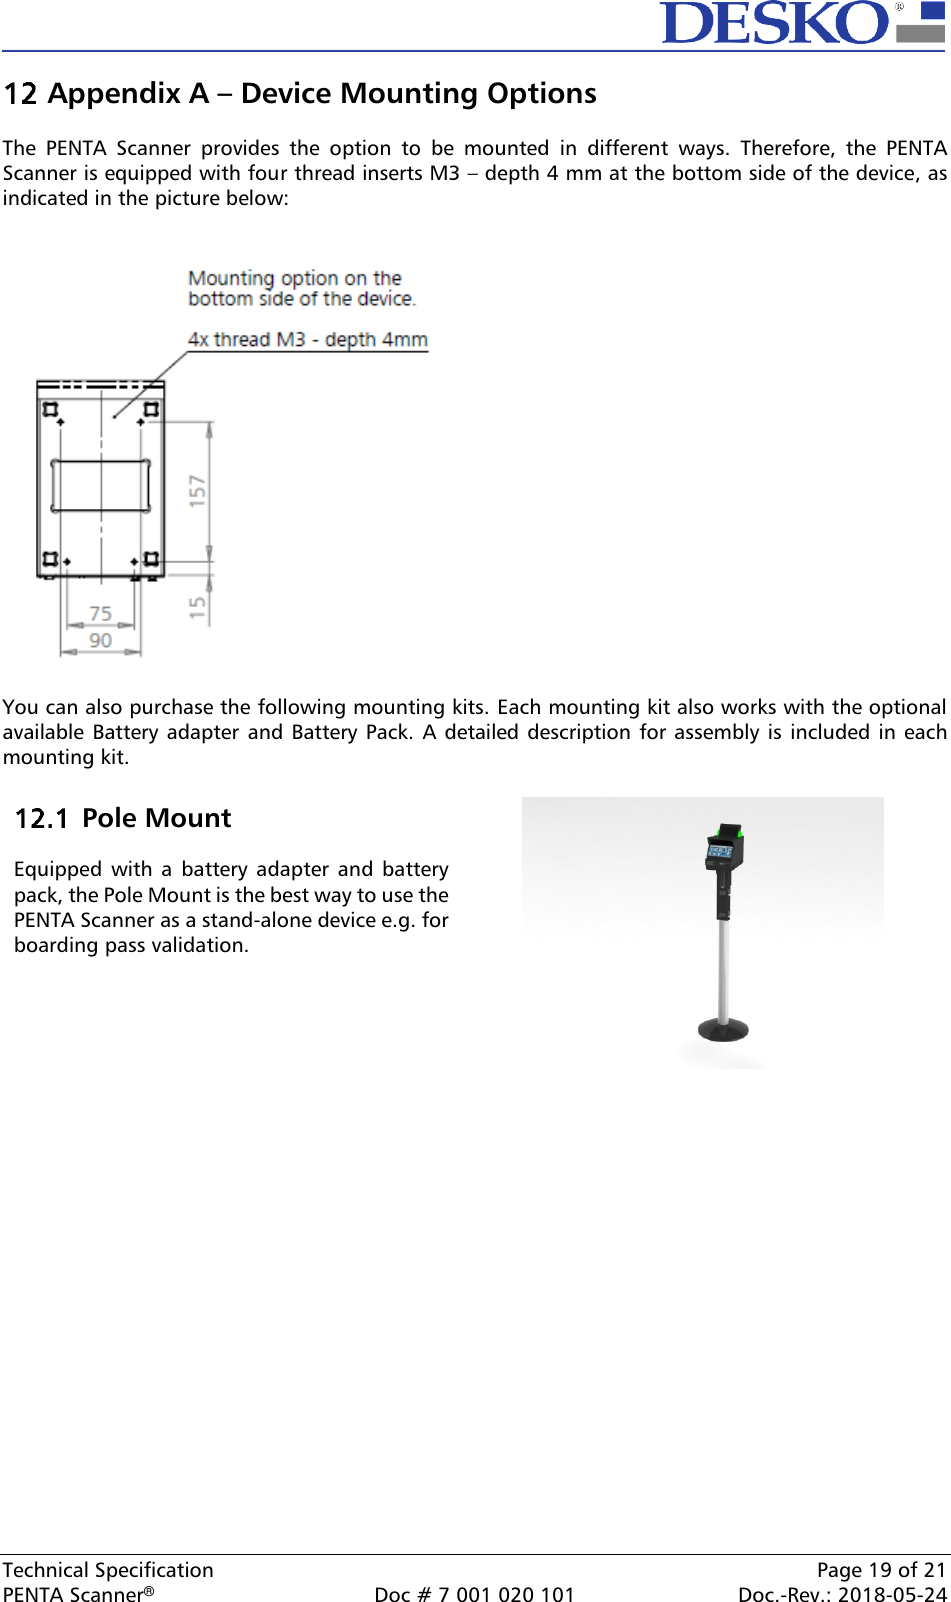  Technical Specification    Page 19 of 21 PENTA Scanner®  Doc # 7 001 020 101  Doc.-Rev.: 2018-05-24  Appendix A – Device Mounting Options  The  PENTA  Scanner  provides  the  option  to  be  mounted  in  different  ways.  Therefore,  the  PENTA Scanner is equipped with four thread inserts M3 – depth 4 mm at the bottom side of the device, as indicated in the picture below:     You can also purchase the following mounting kits. Each mounting kit also works with the optional available  Battery adapter and Battery  Pack. A detailed description for  assembly is  included in each mounting kit.      Pole Mount  Equipped  with  a  battery  adapter and battery pack, the Pole Mount is the best way to use the PENTA Scanner as a stand-alone device e.g. for boarding pass validation.    